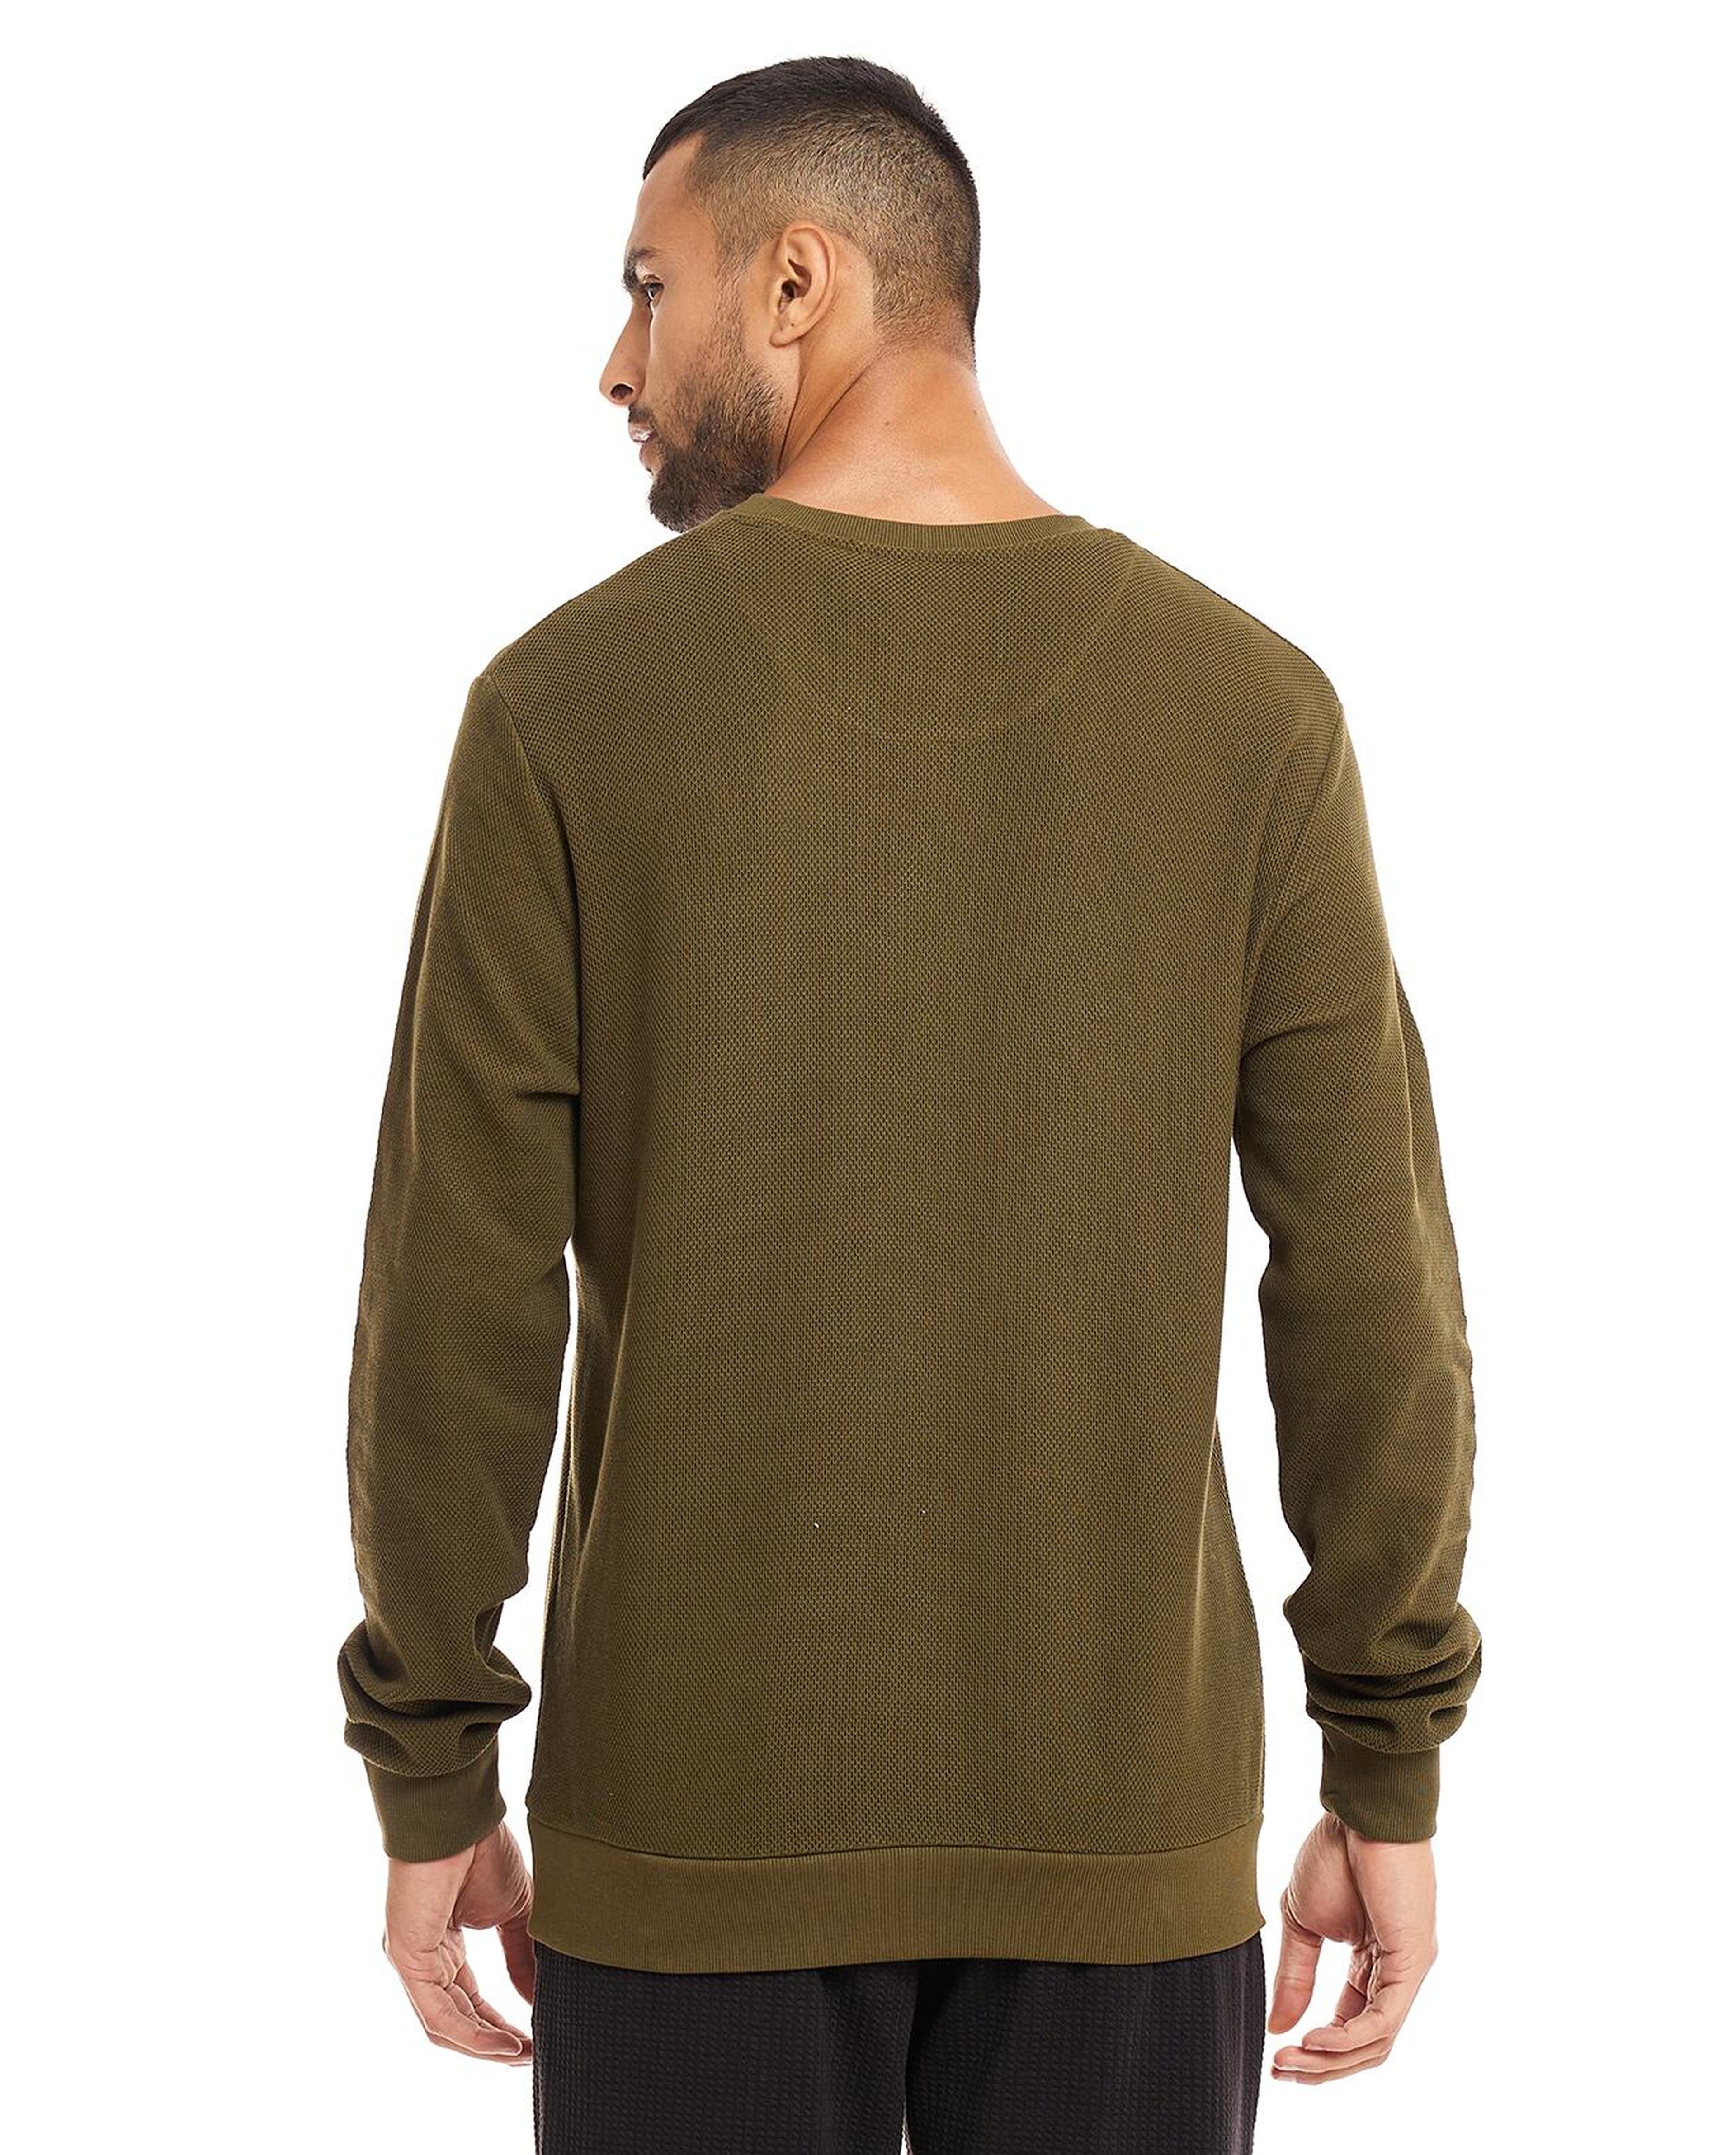 Textured Sweatshirt with Crew Neck and Long Sleeves